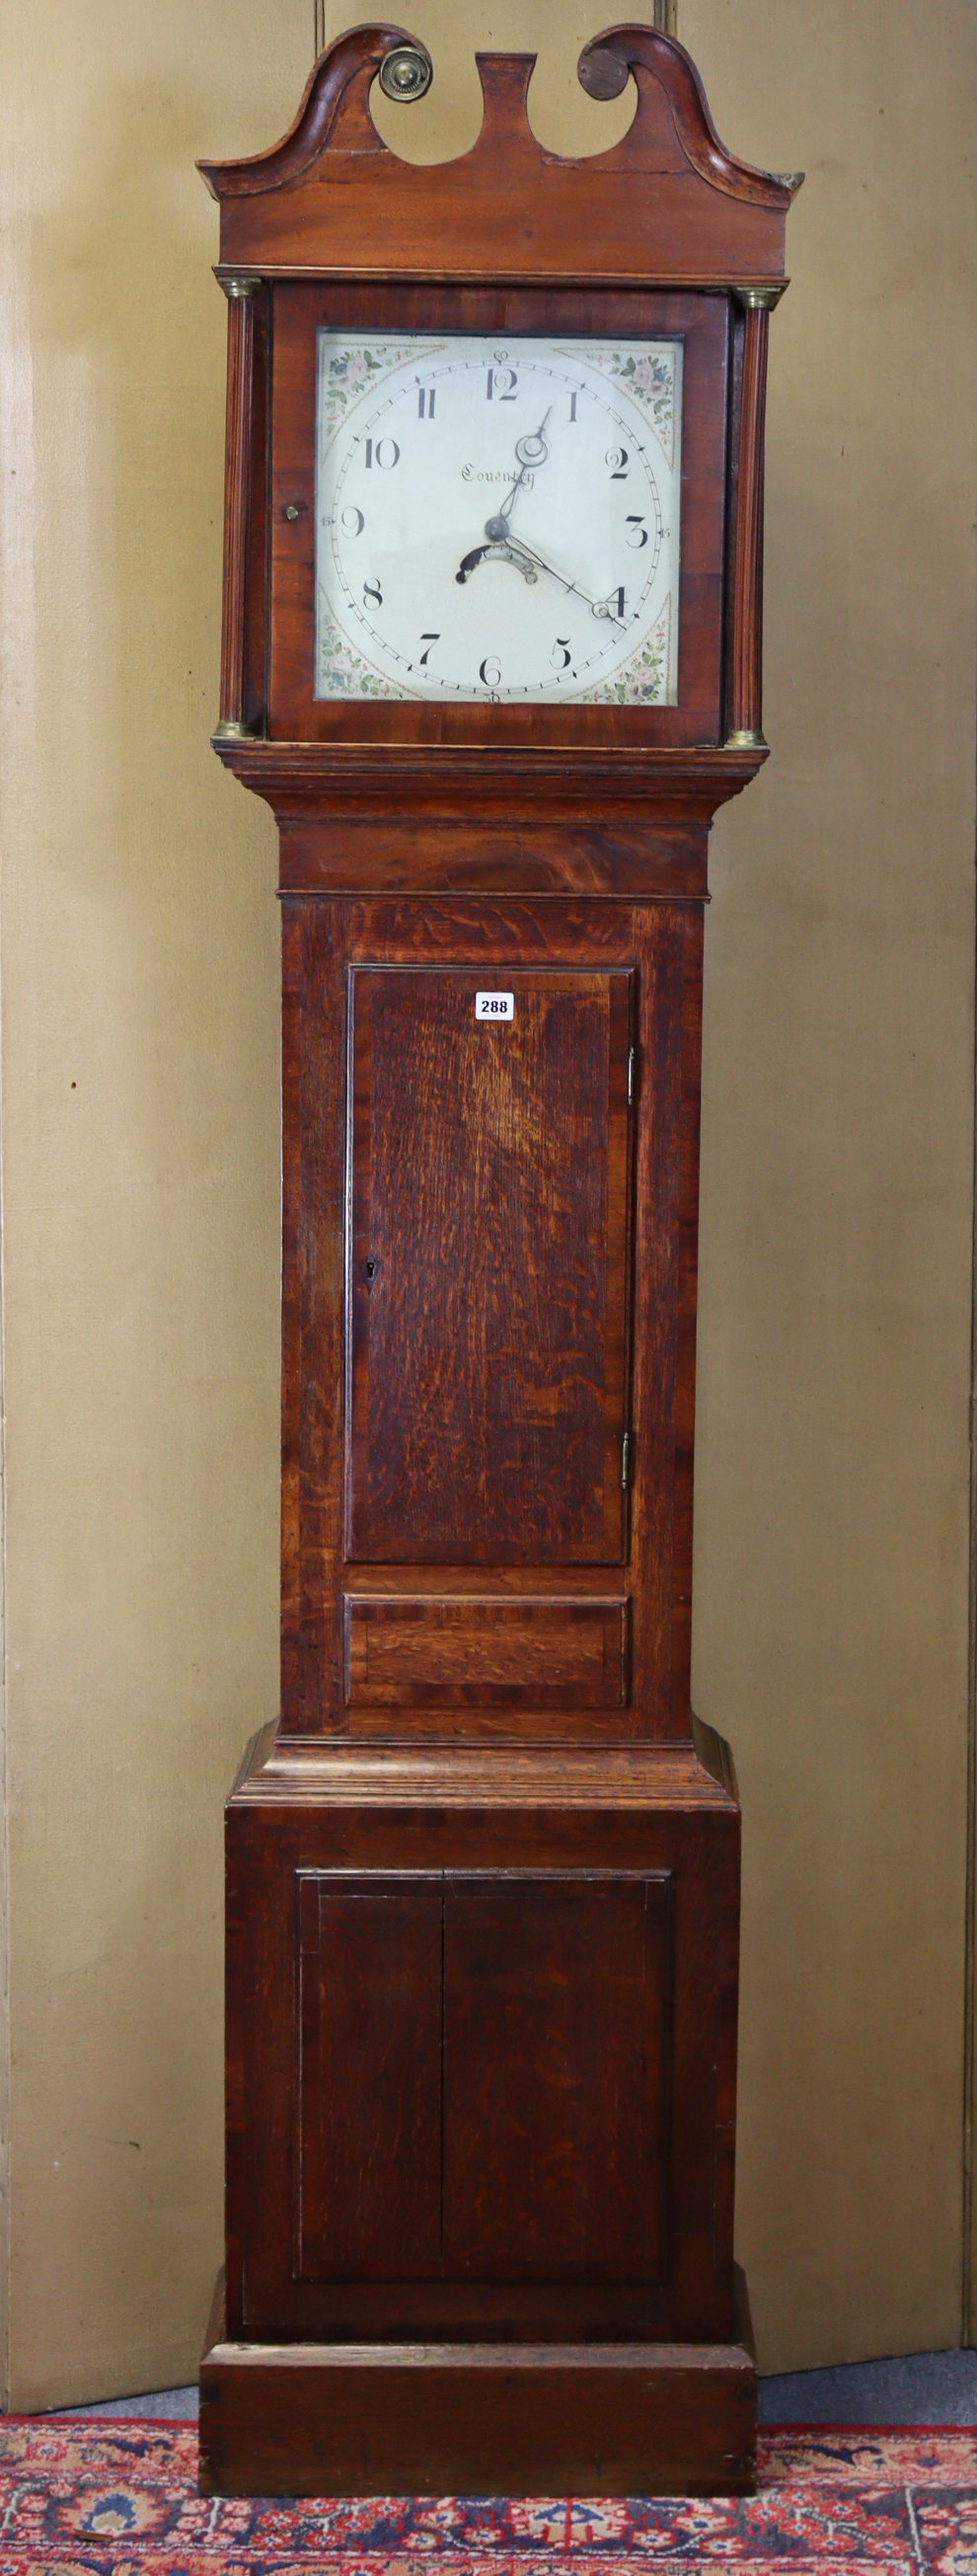 A late 18th/early 19th century provincial longcase clock, the painted 11½” dial inscribed “